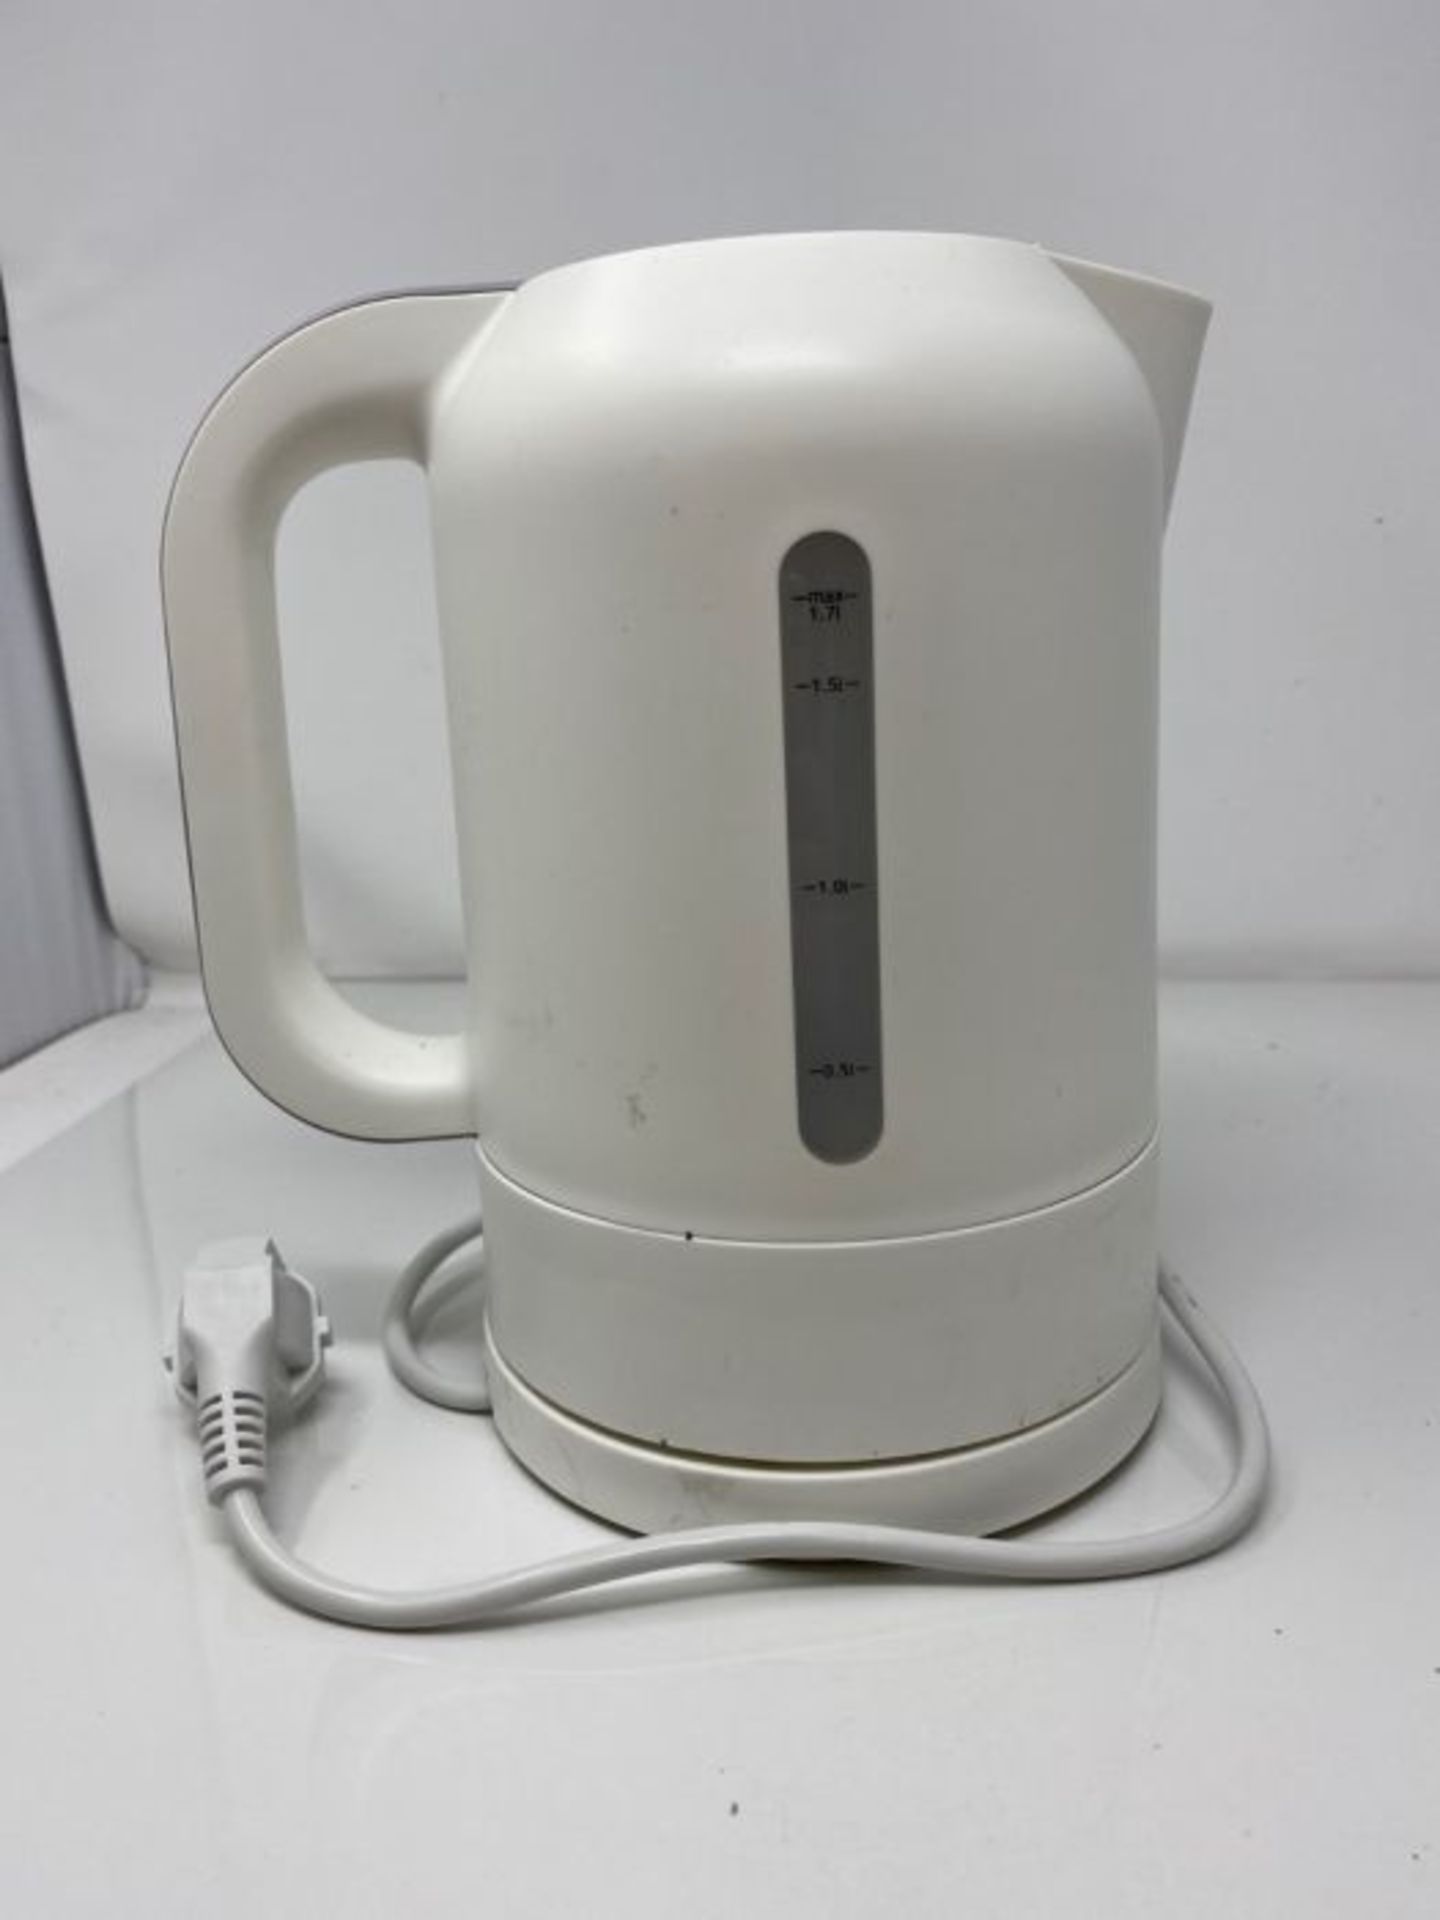 Russell Hobbs 21150-70 electrical kettle - electric kettles - Image 3 of 3